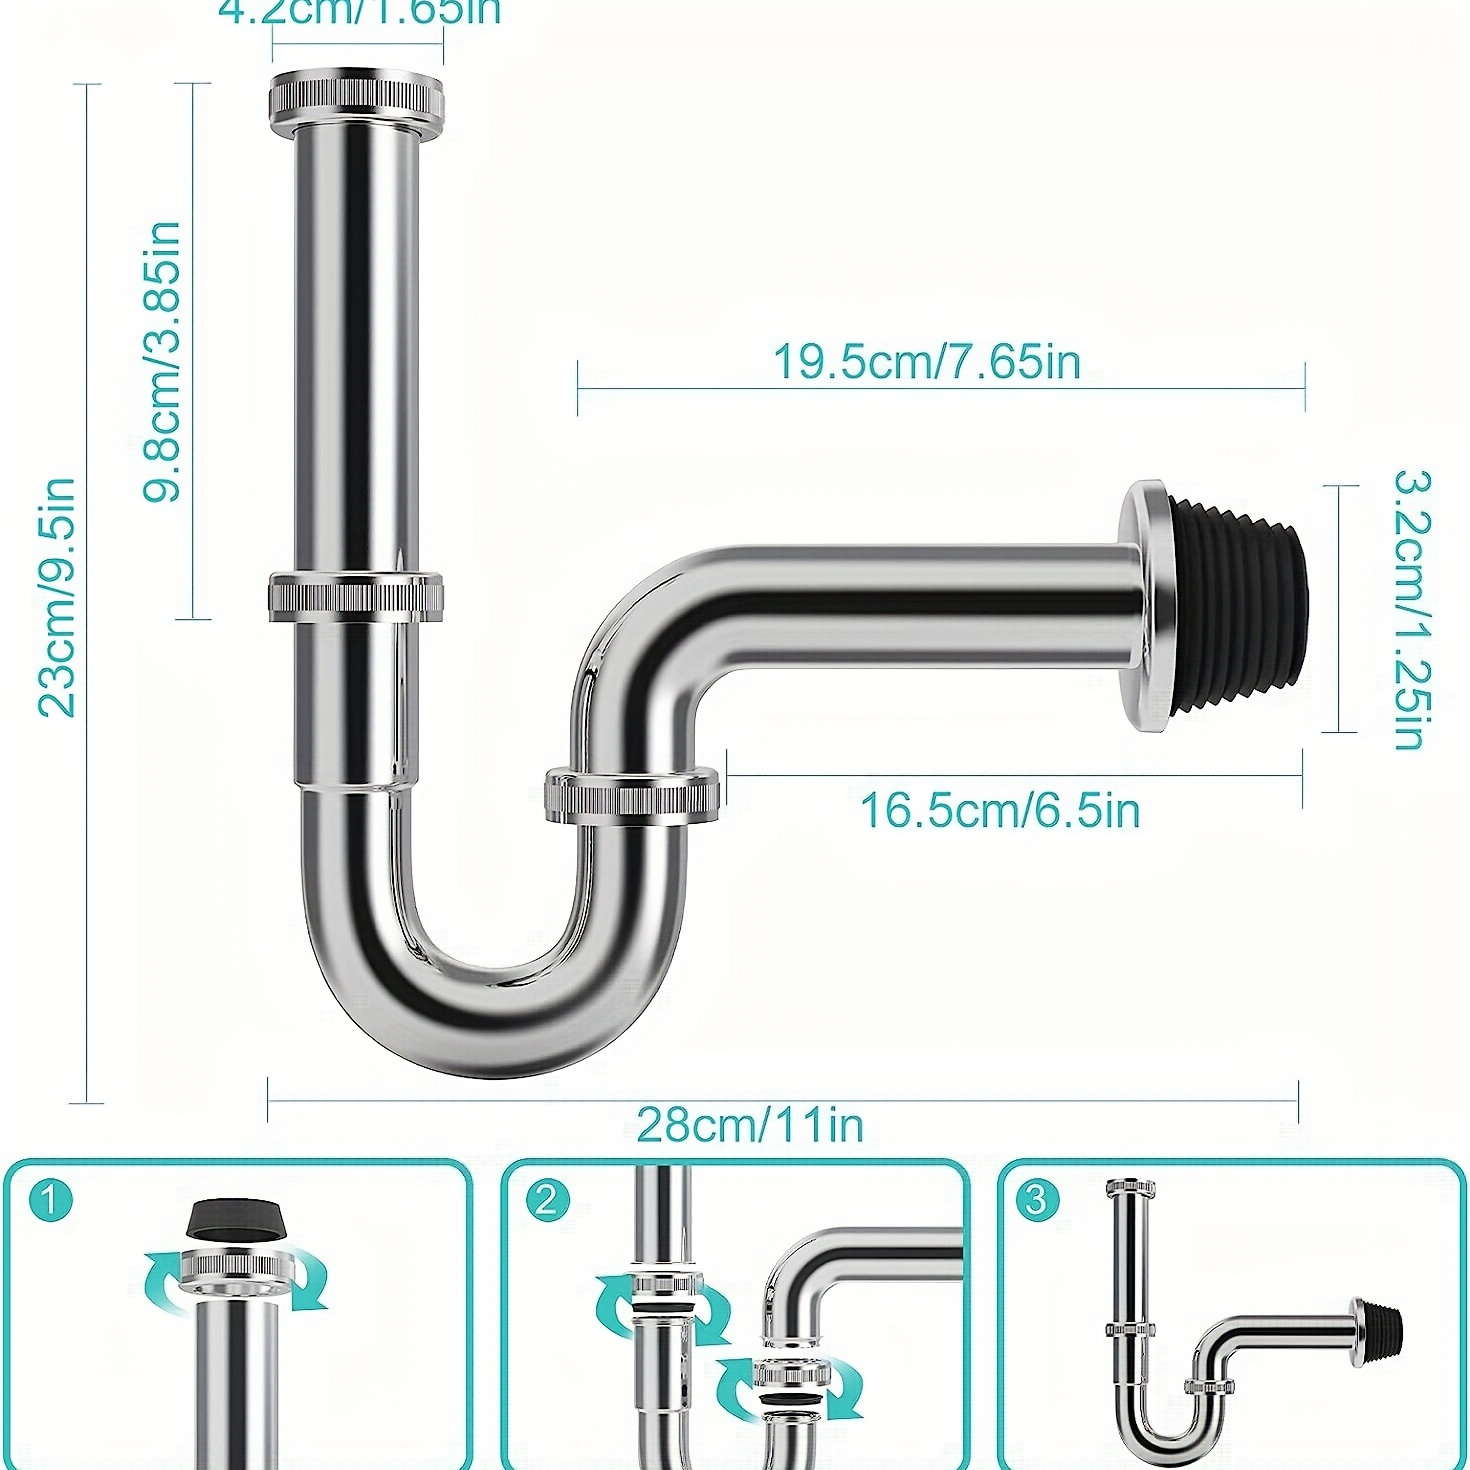 Universal Siphon For Washbasins And Sinks - Tubular Basin Drain - Adaptive  Siphon - Odor Trap With Cleaning Holes + Instructions